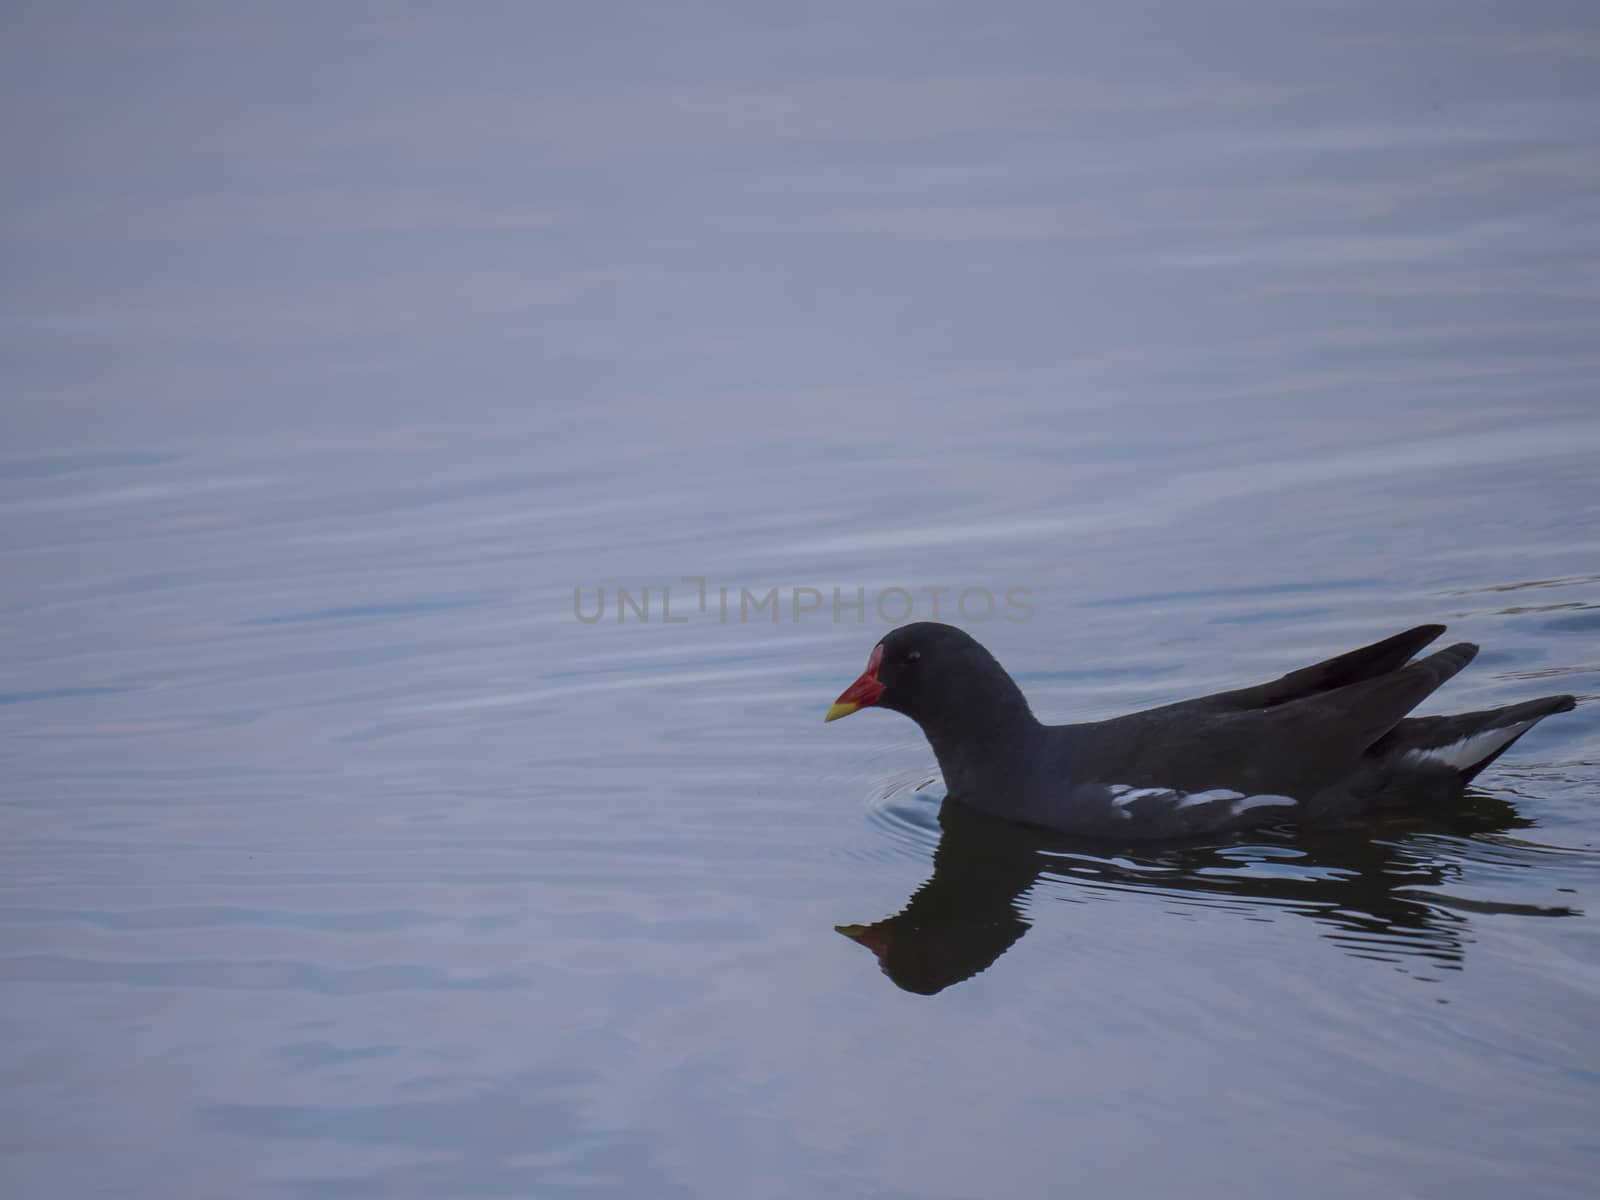 The common moorhen Gallinula chloropus also known as the waterhen, the swamp chicken, and as the common gallinule swimming on blue lake water during sunset twillight.